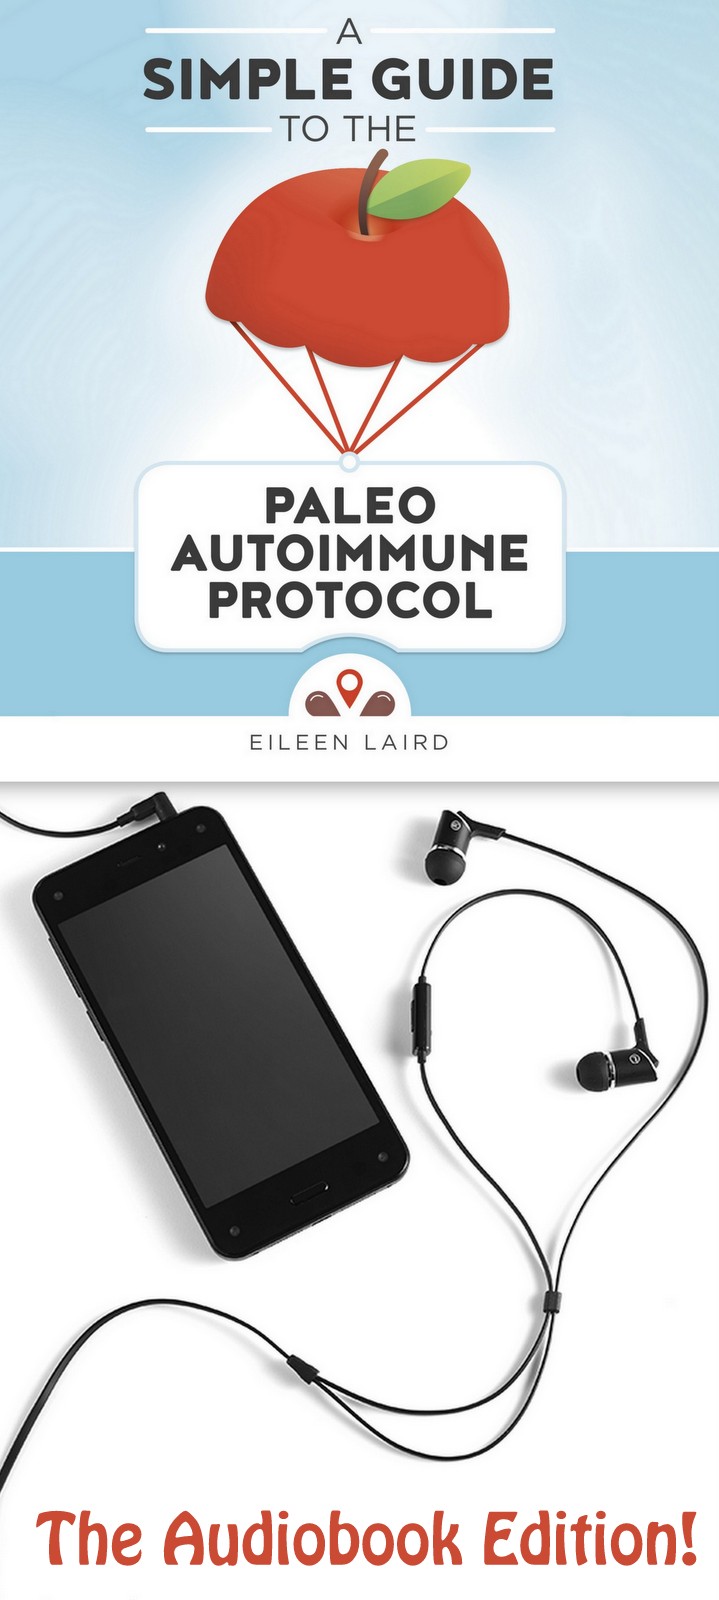 Simple Guide to the Paleo Autoimmune Protocol Is Now Available as an Audiobook!